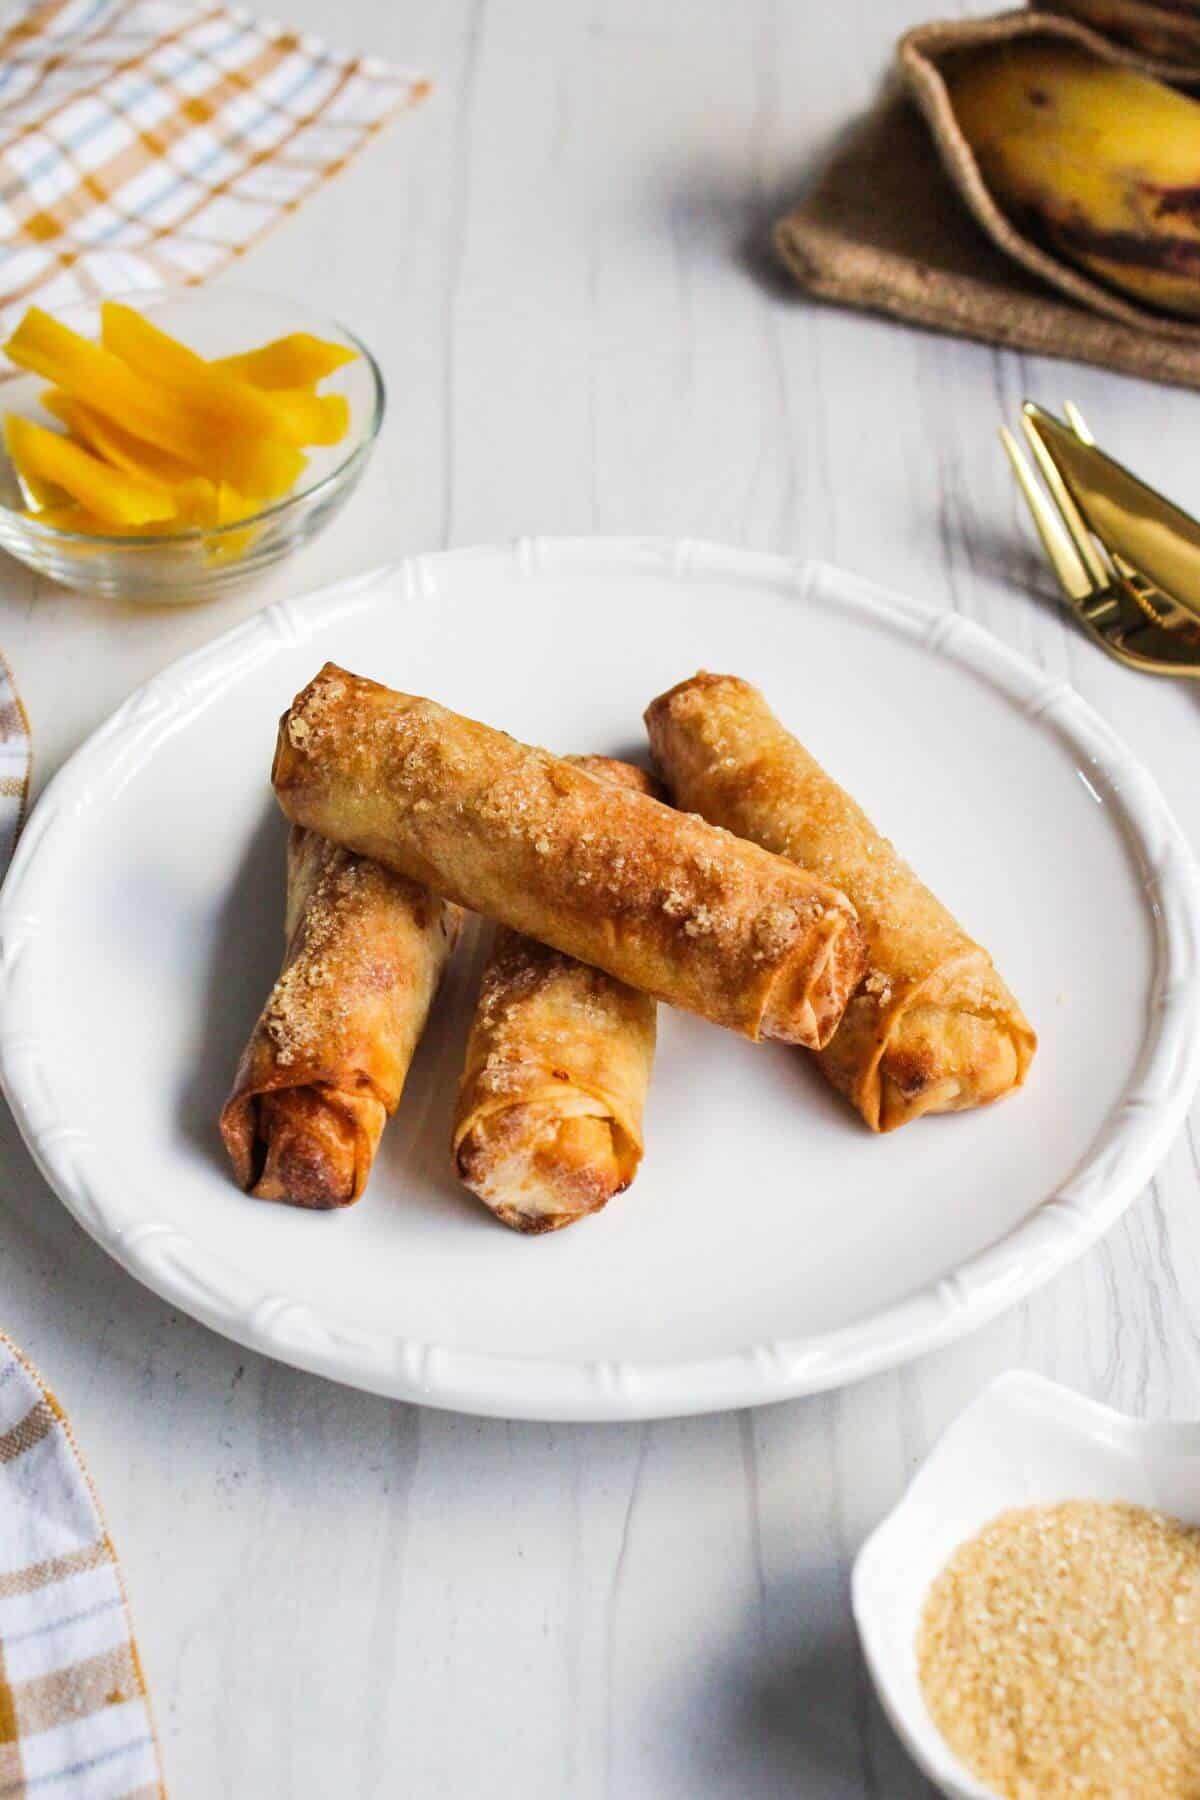 Banana turon lumpia rolls on a white plate with a fork.